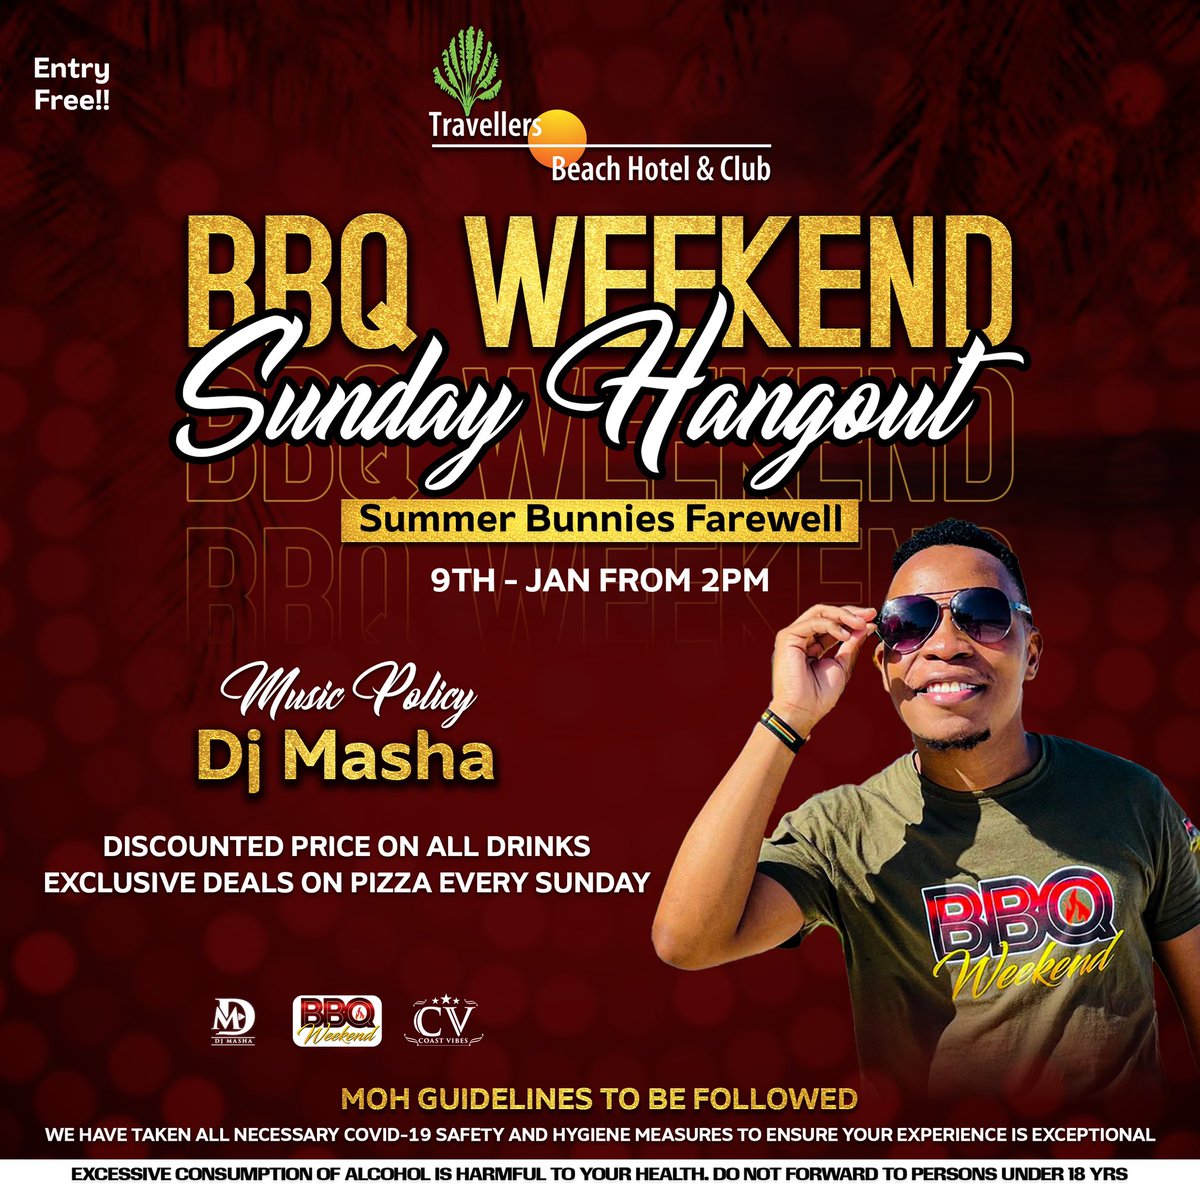 Festive season was real. It’s time to say Bye to our summer bunnies. Come through this Sunday and enjoy some BBQ experience by the beach. Don’t be left out!! ☀️⛱ @djmashakenya @travellersbhc #Events254 #254fashion #254publicity #MagicalKenya #TembeaKenya